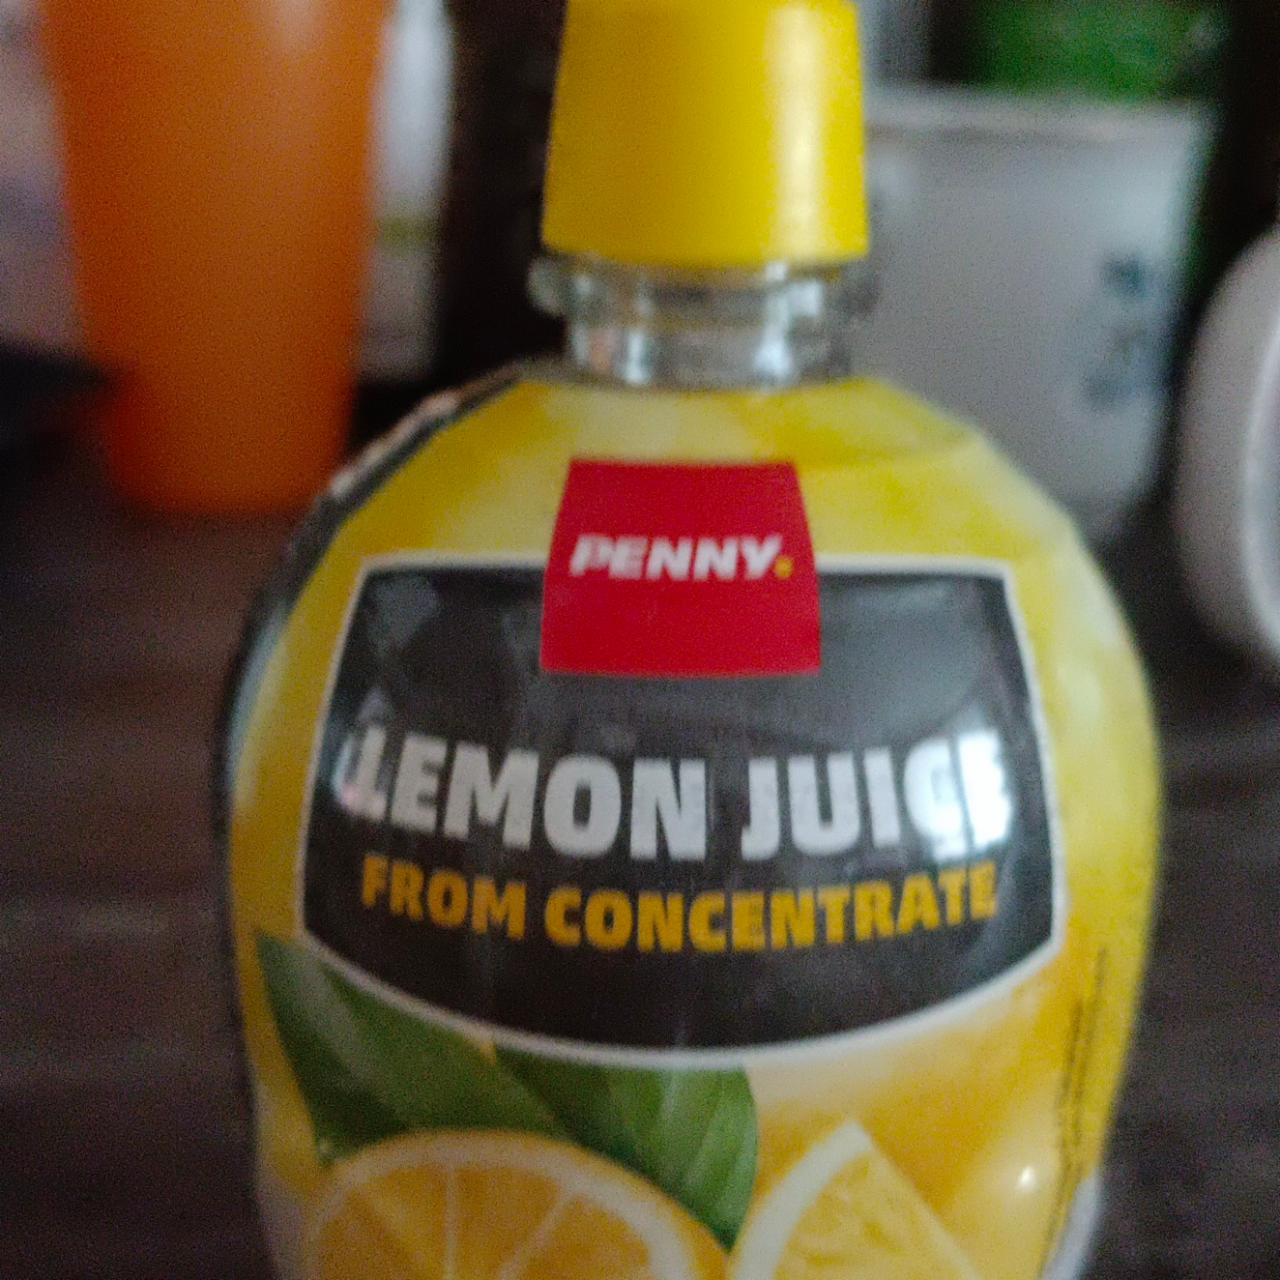 Fotografie - Lemon juice From Concentrate Penny